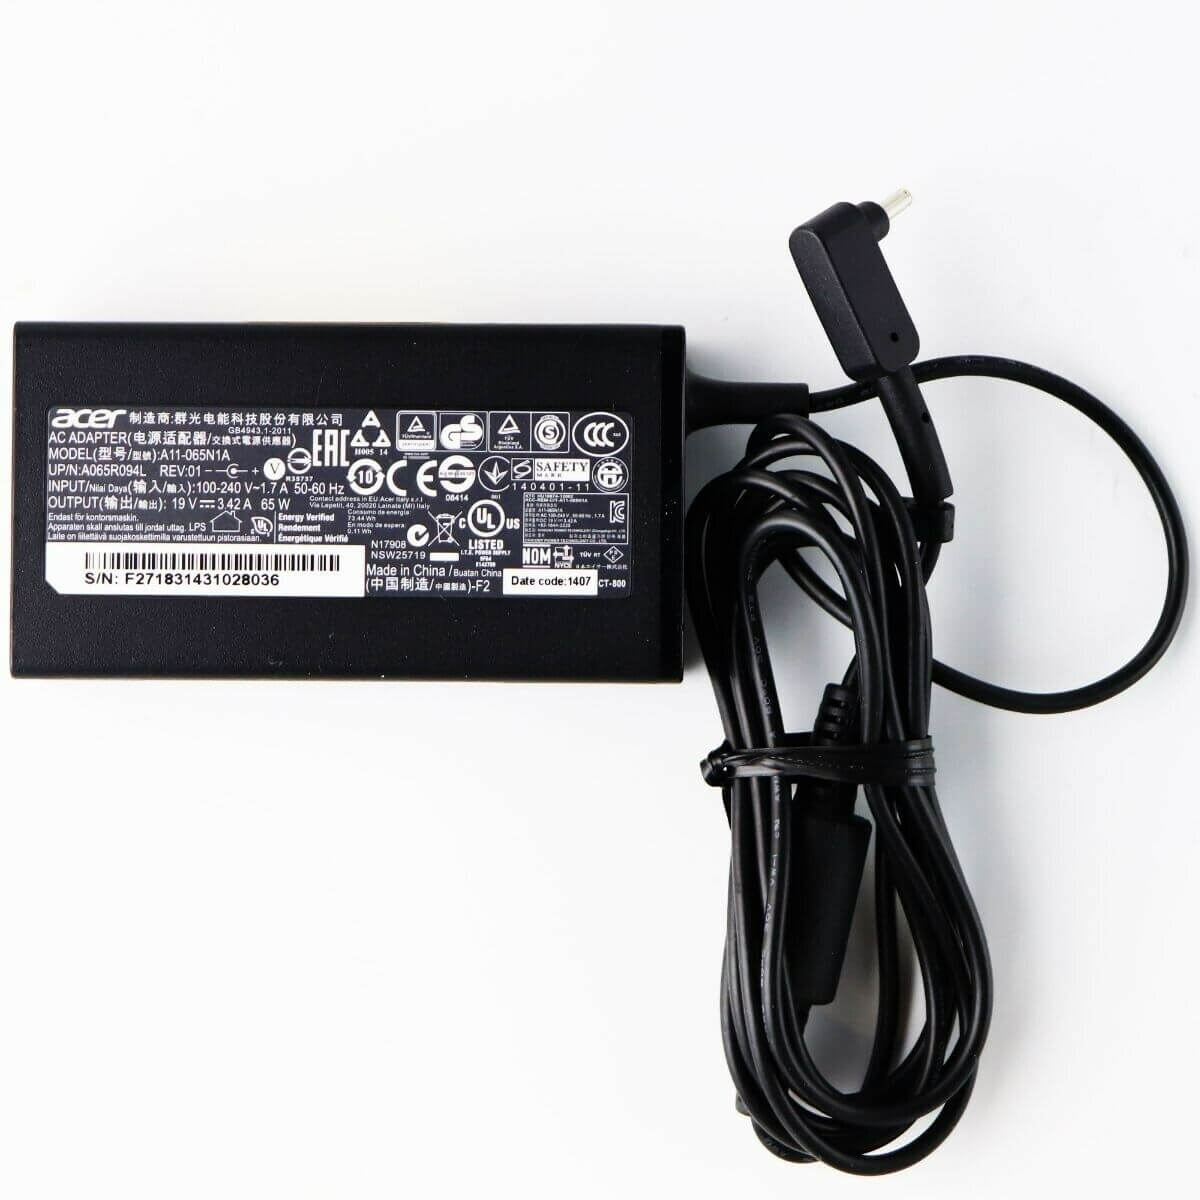 Acer Ultrabook S5 S7 Chrombook C720 C730 small pin 3.0*1.0mm 19V 3.42A 65w Adapter